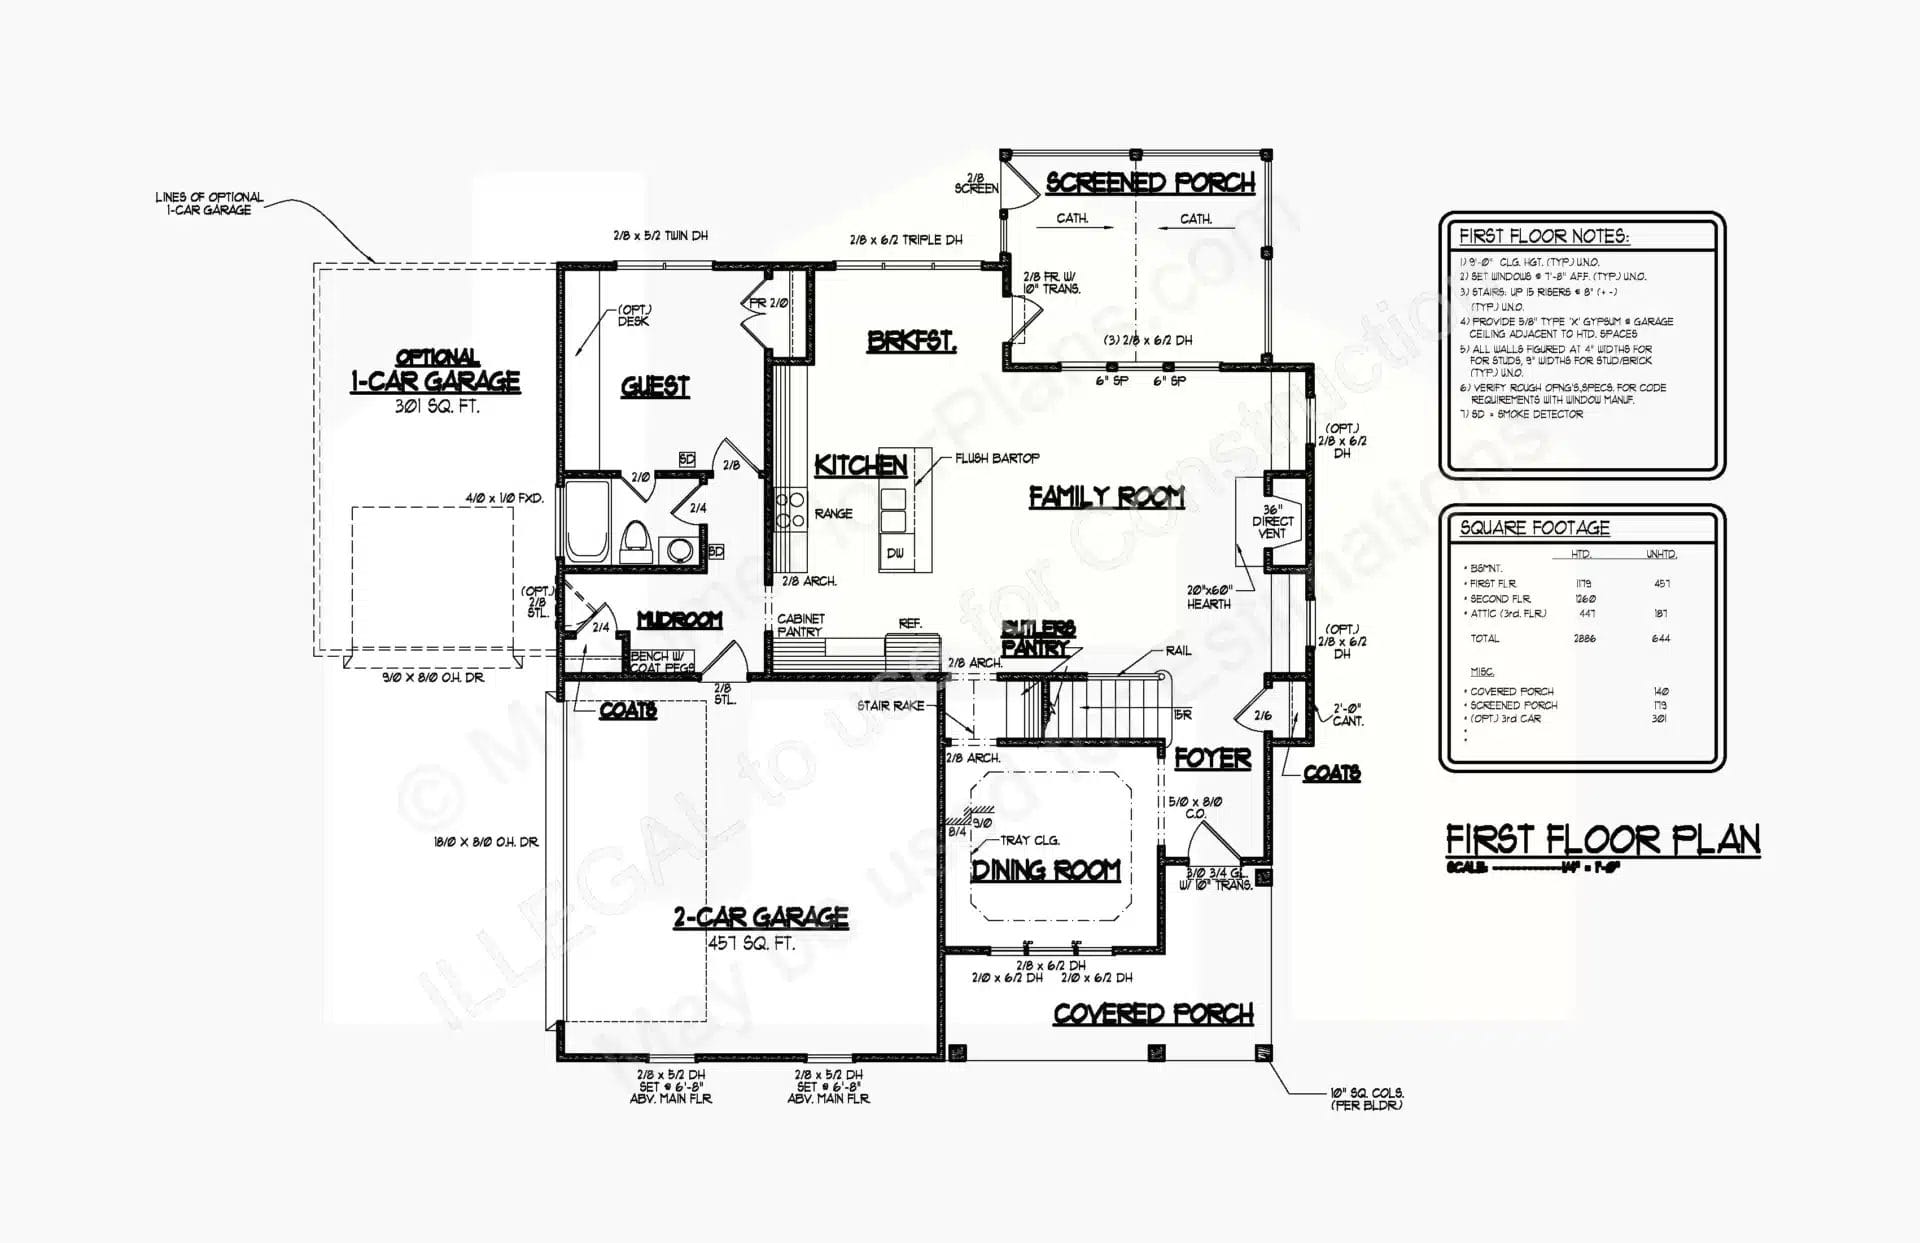 An architectural floor plan of a residential home showcases labeled rooms including a kitchen, family room, dining room, and multiple porches. Annotations and dimensions provide detail for a 13-1790 garage and various storage areas.